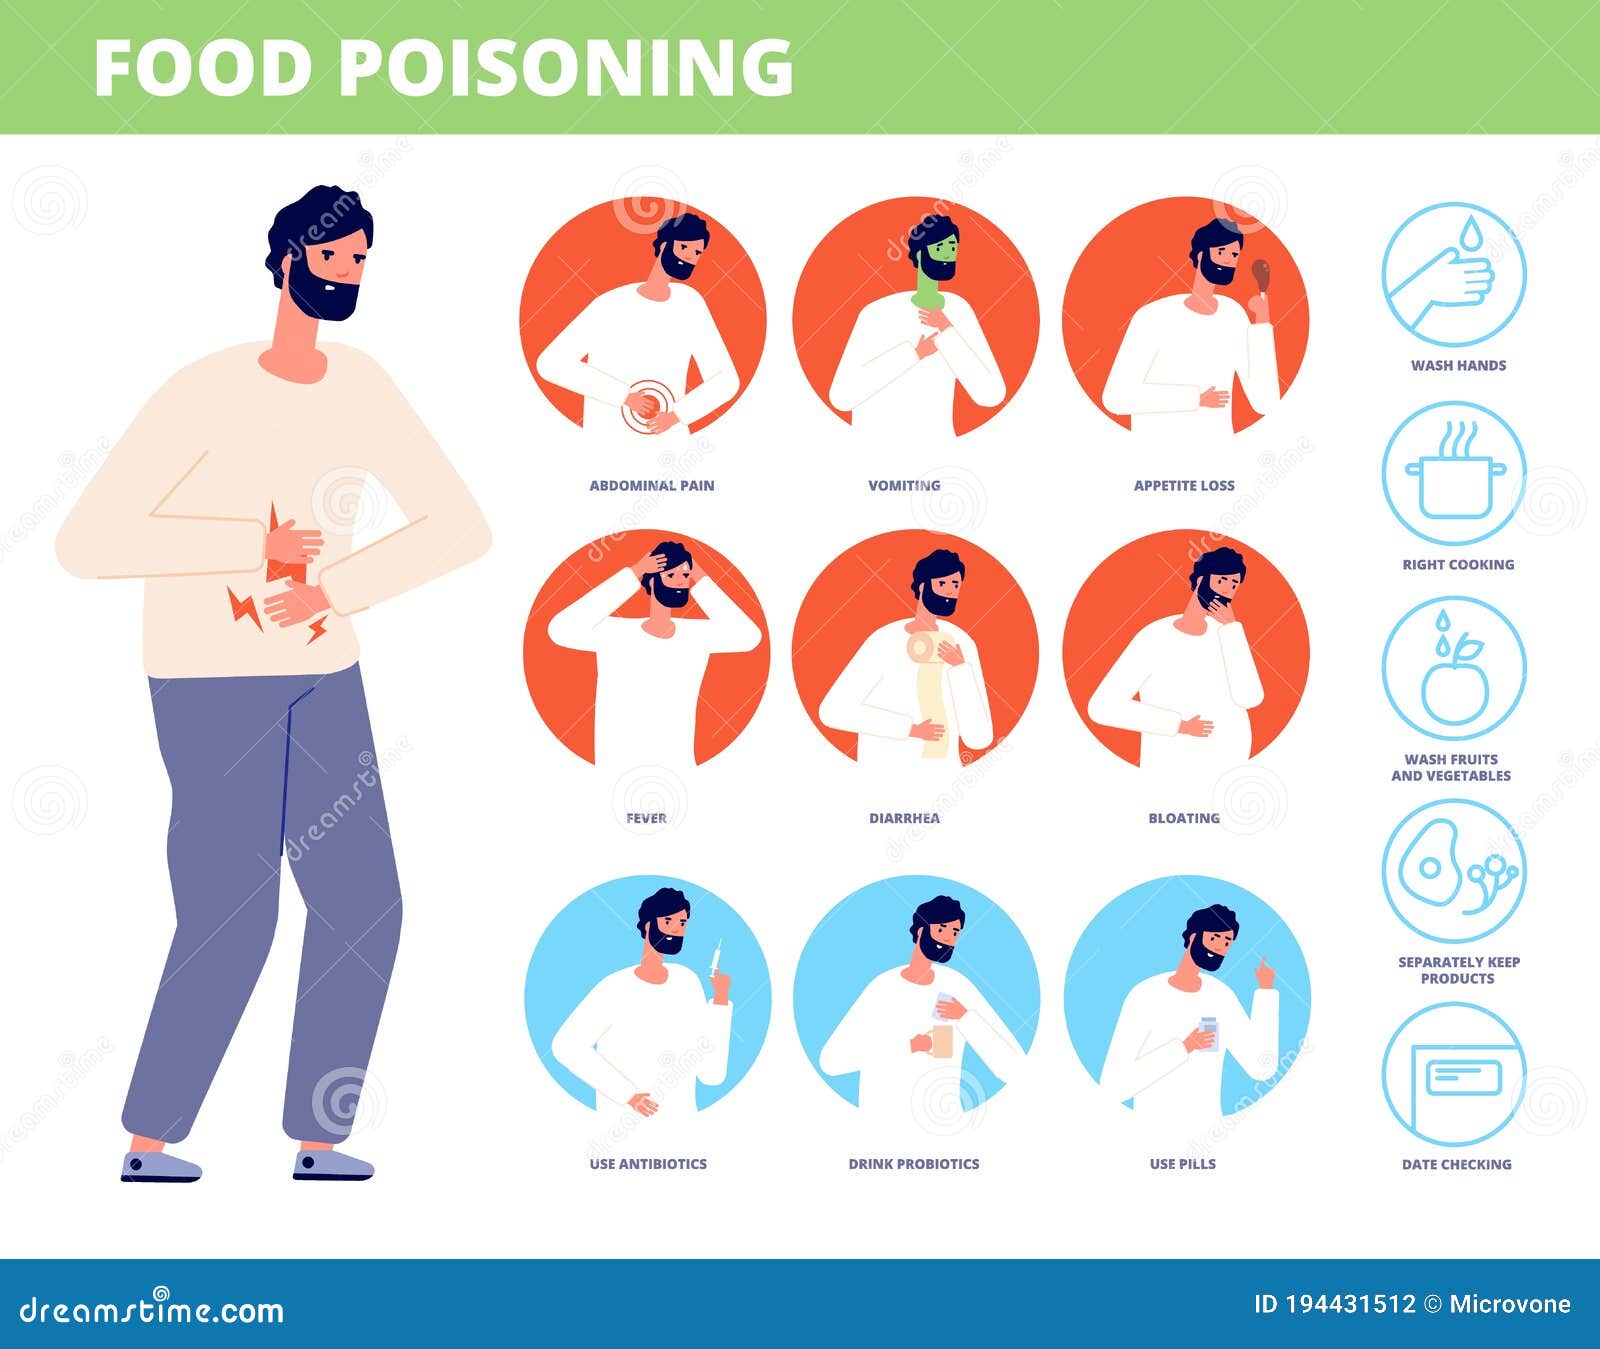 food poisoning symptoms. man sick, poison food or indigestion. stomach pain, diarrhea fever nausea. disease prevention